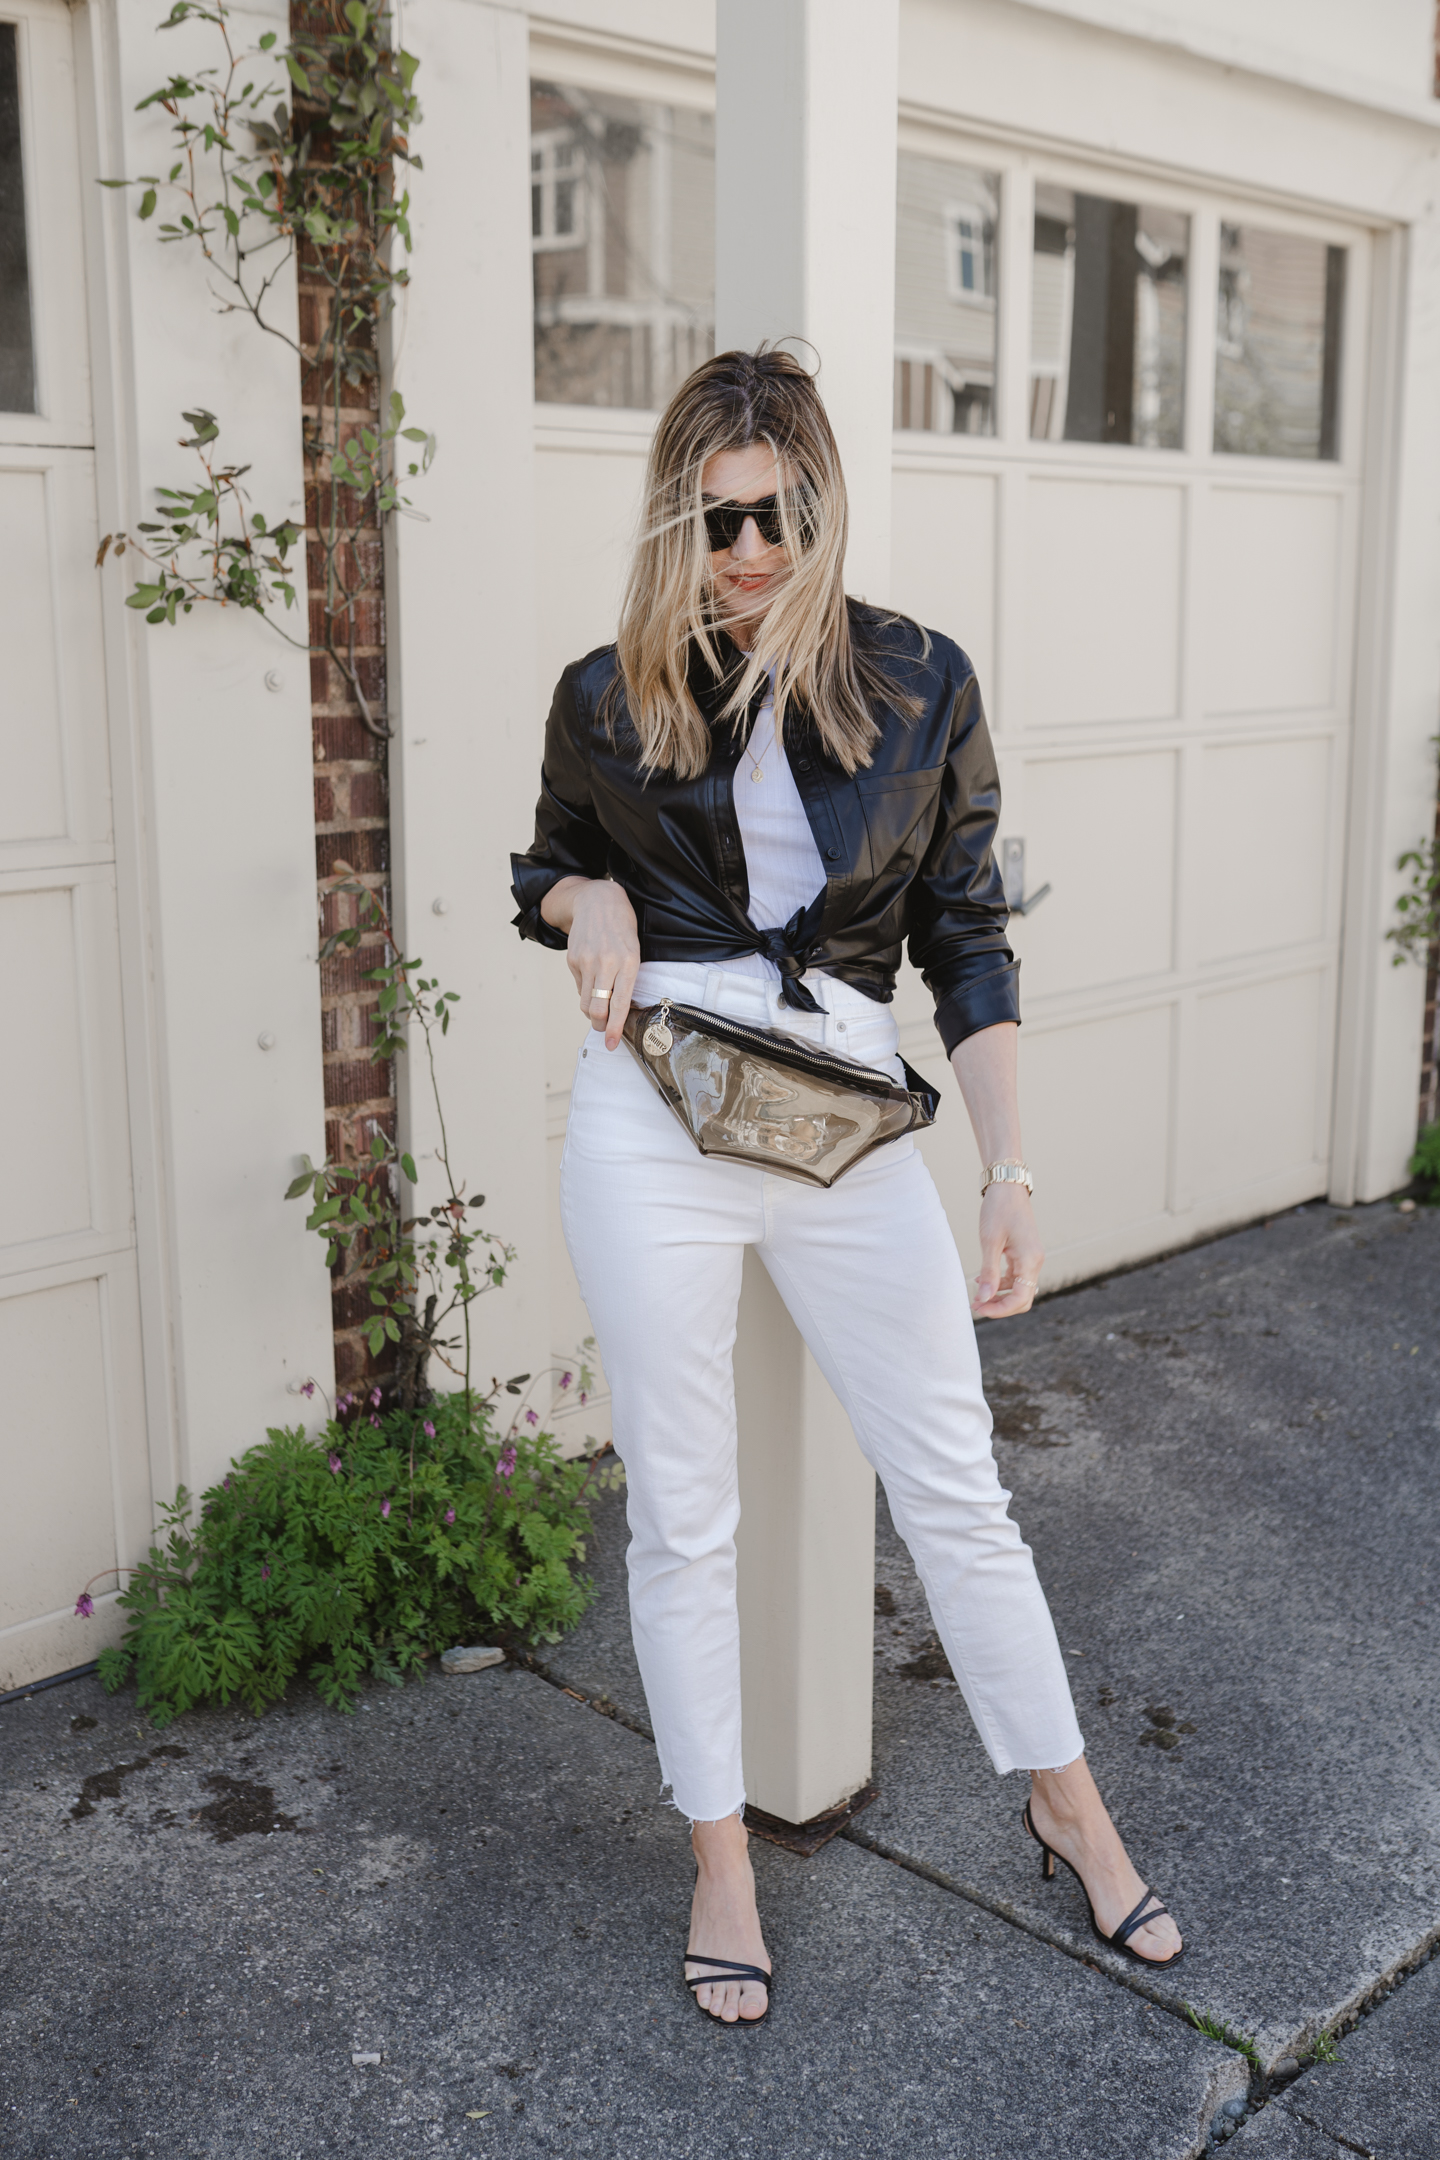 The Grey Edit - Cortney Bigelow - Seattle Lifestyle Blogger - April Stylelogue - Seattle Bloggers - Trend Story - Vegan Leather Separates